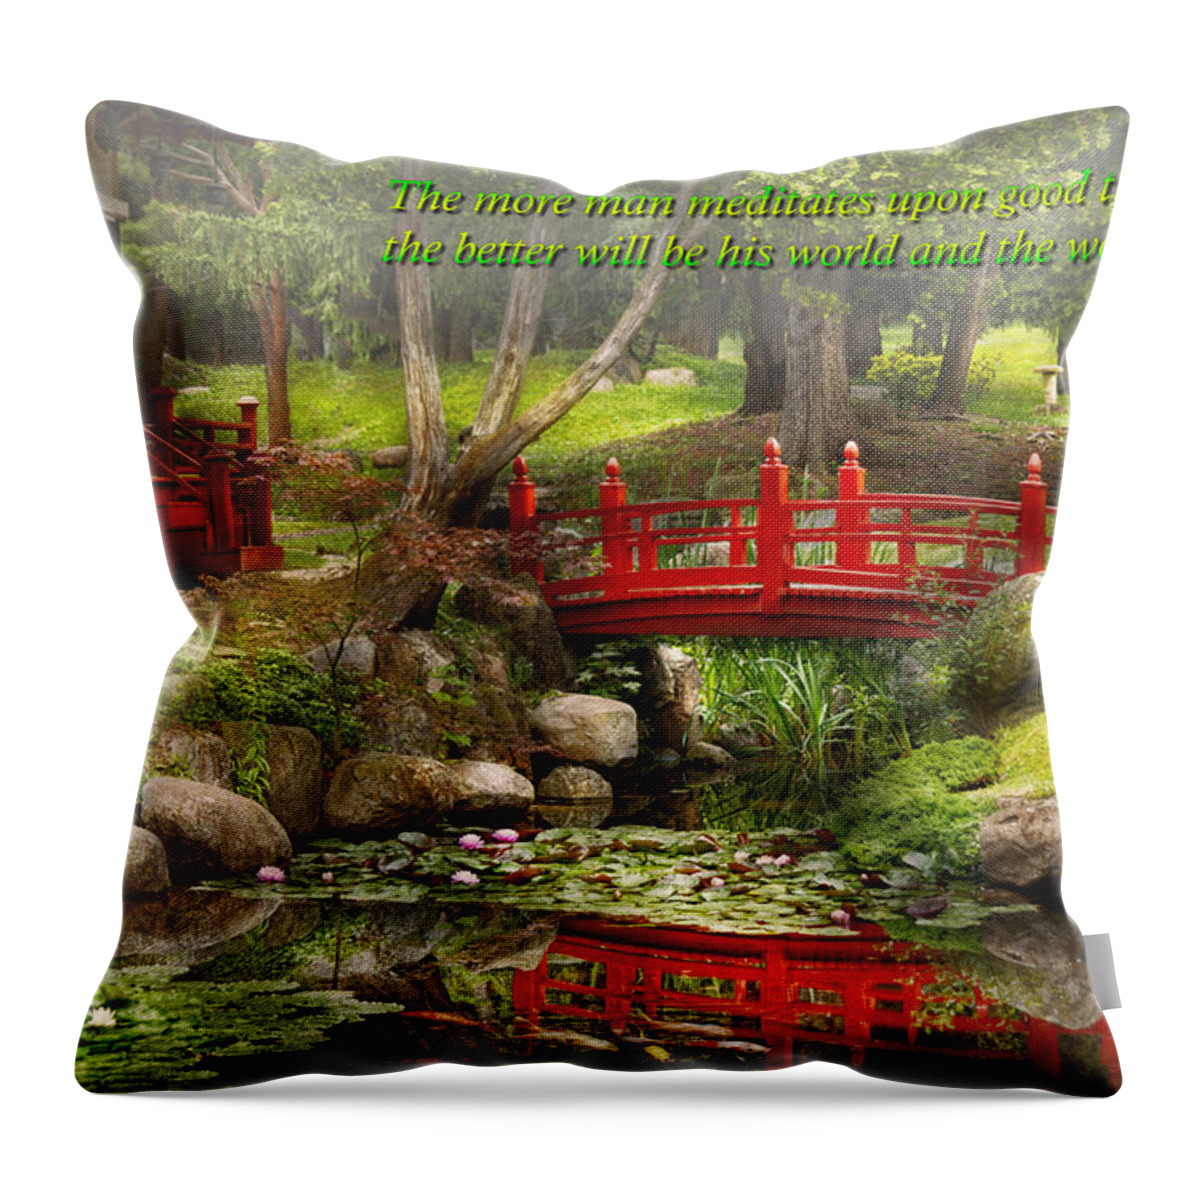 Teahouse Throw Pillow featuring the photograph Inspiration - Japanese Garden - Meditation by Mike Savad